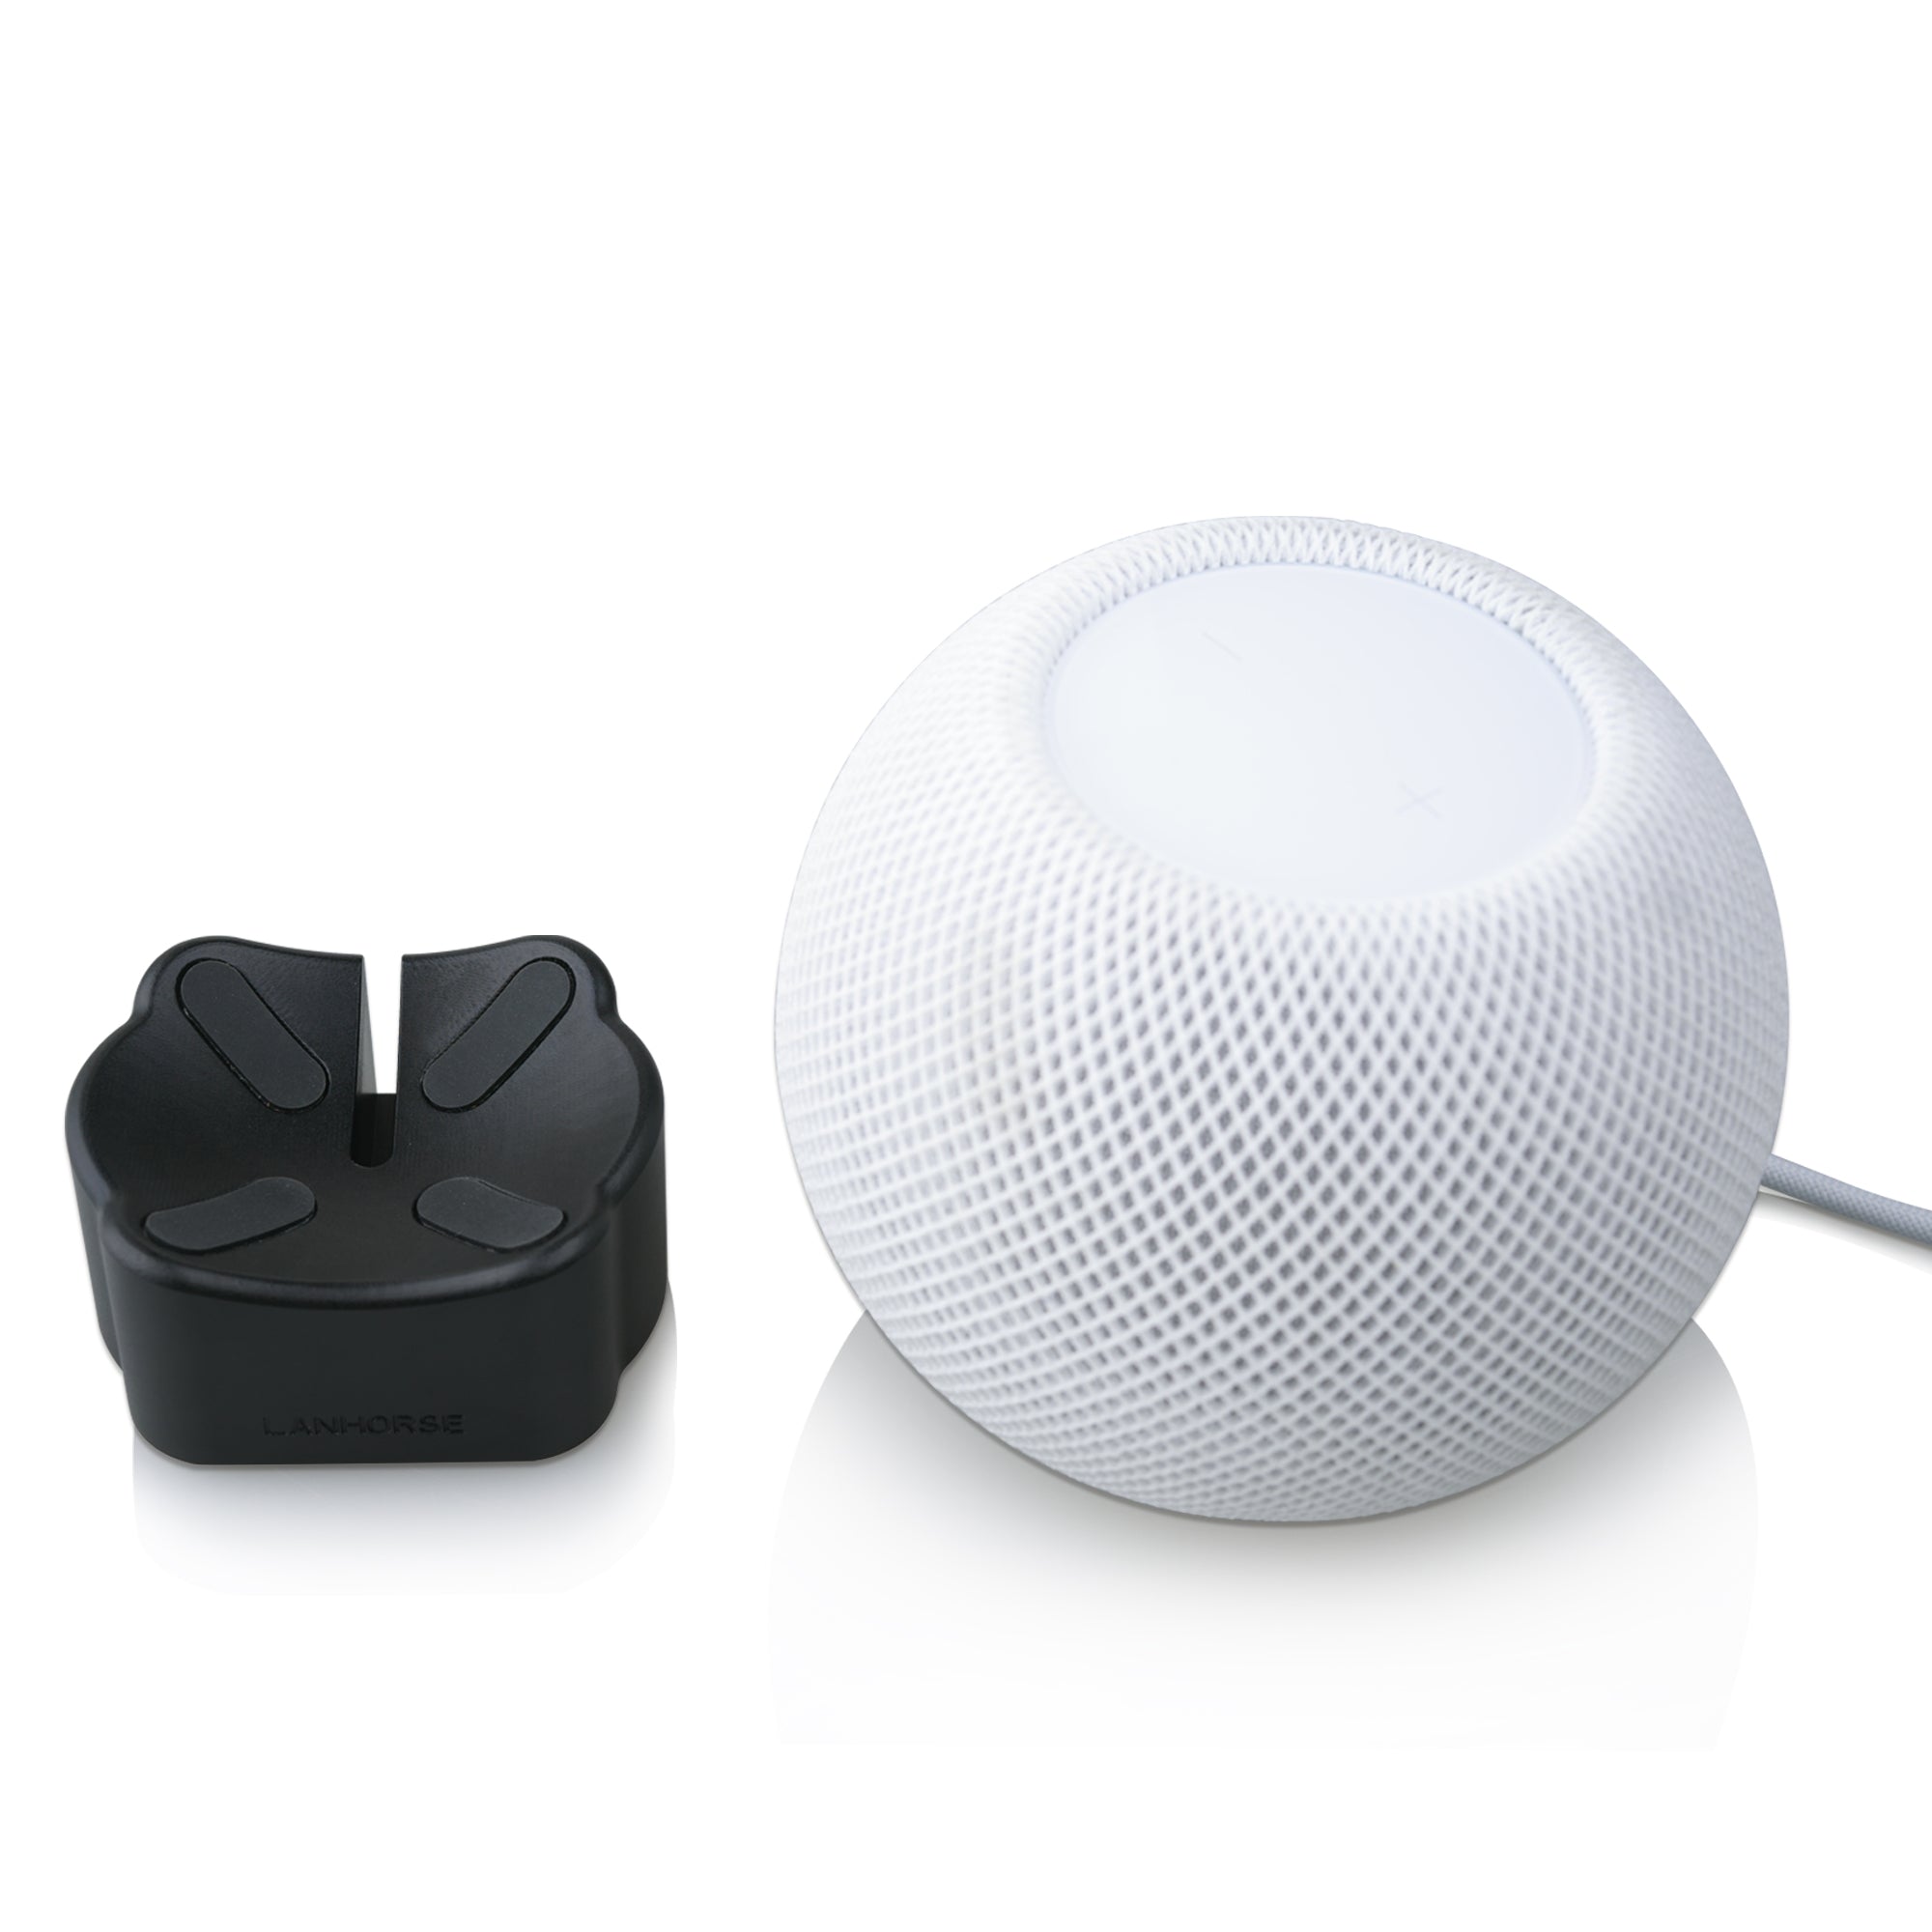 Lanhorse Stand for HomePod Mini, Aluminum Desktop HomePod Mini Stand with Adjustable Placement Angle, HomePod Mini Rotating Stand.